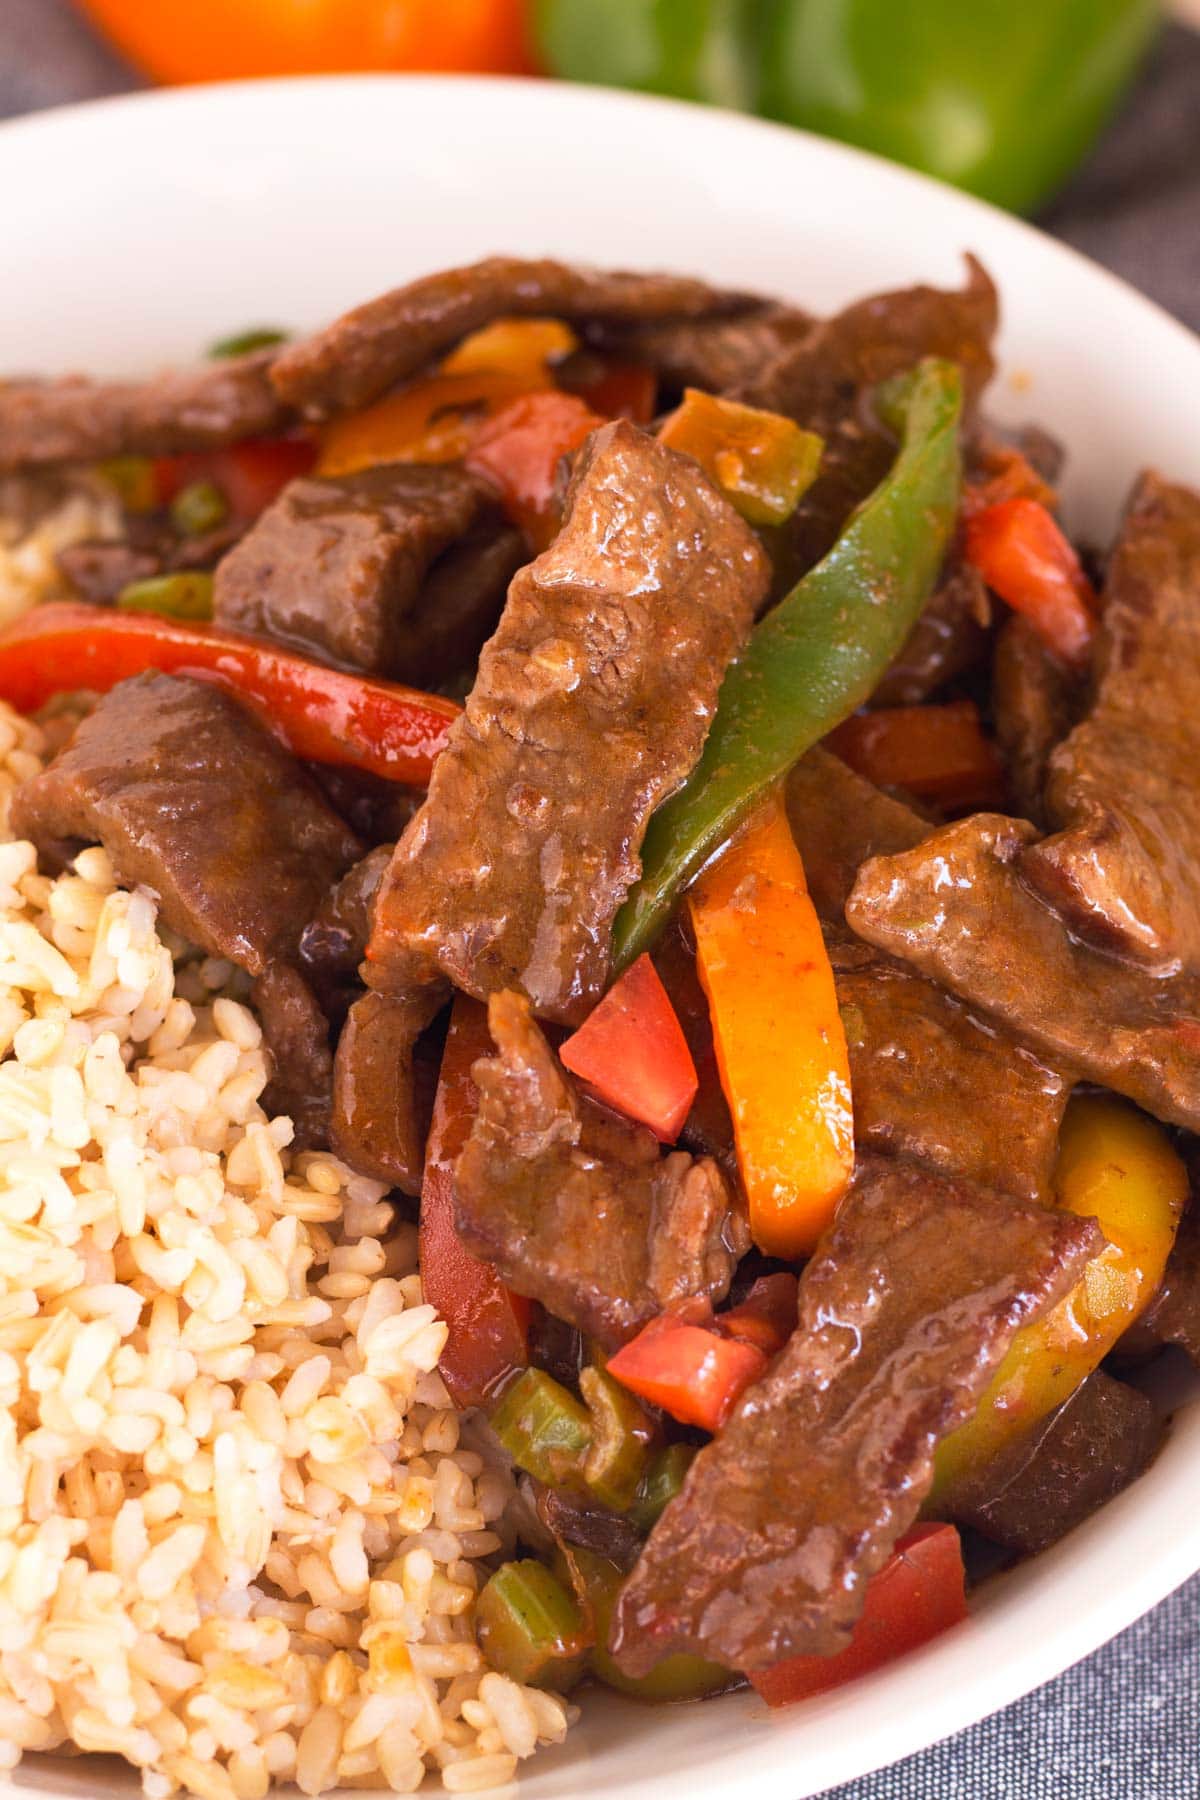 Tender pieces of pepper steak served over rice.